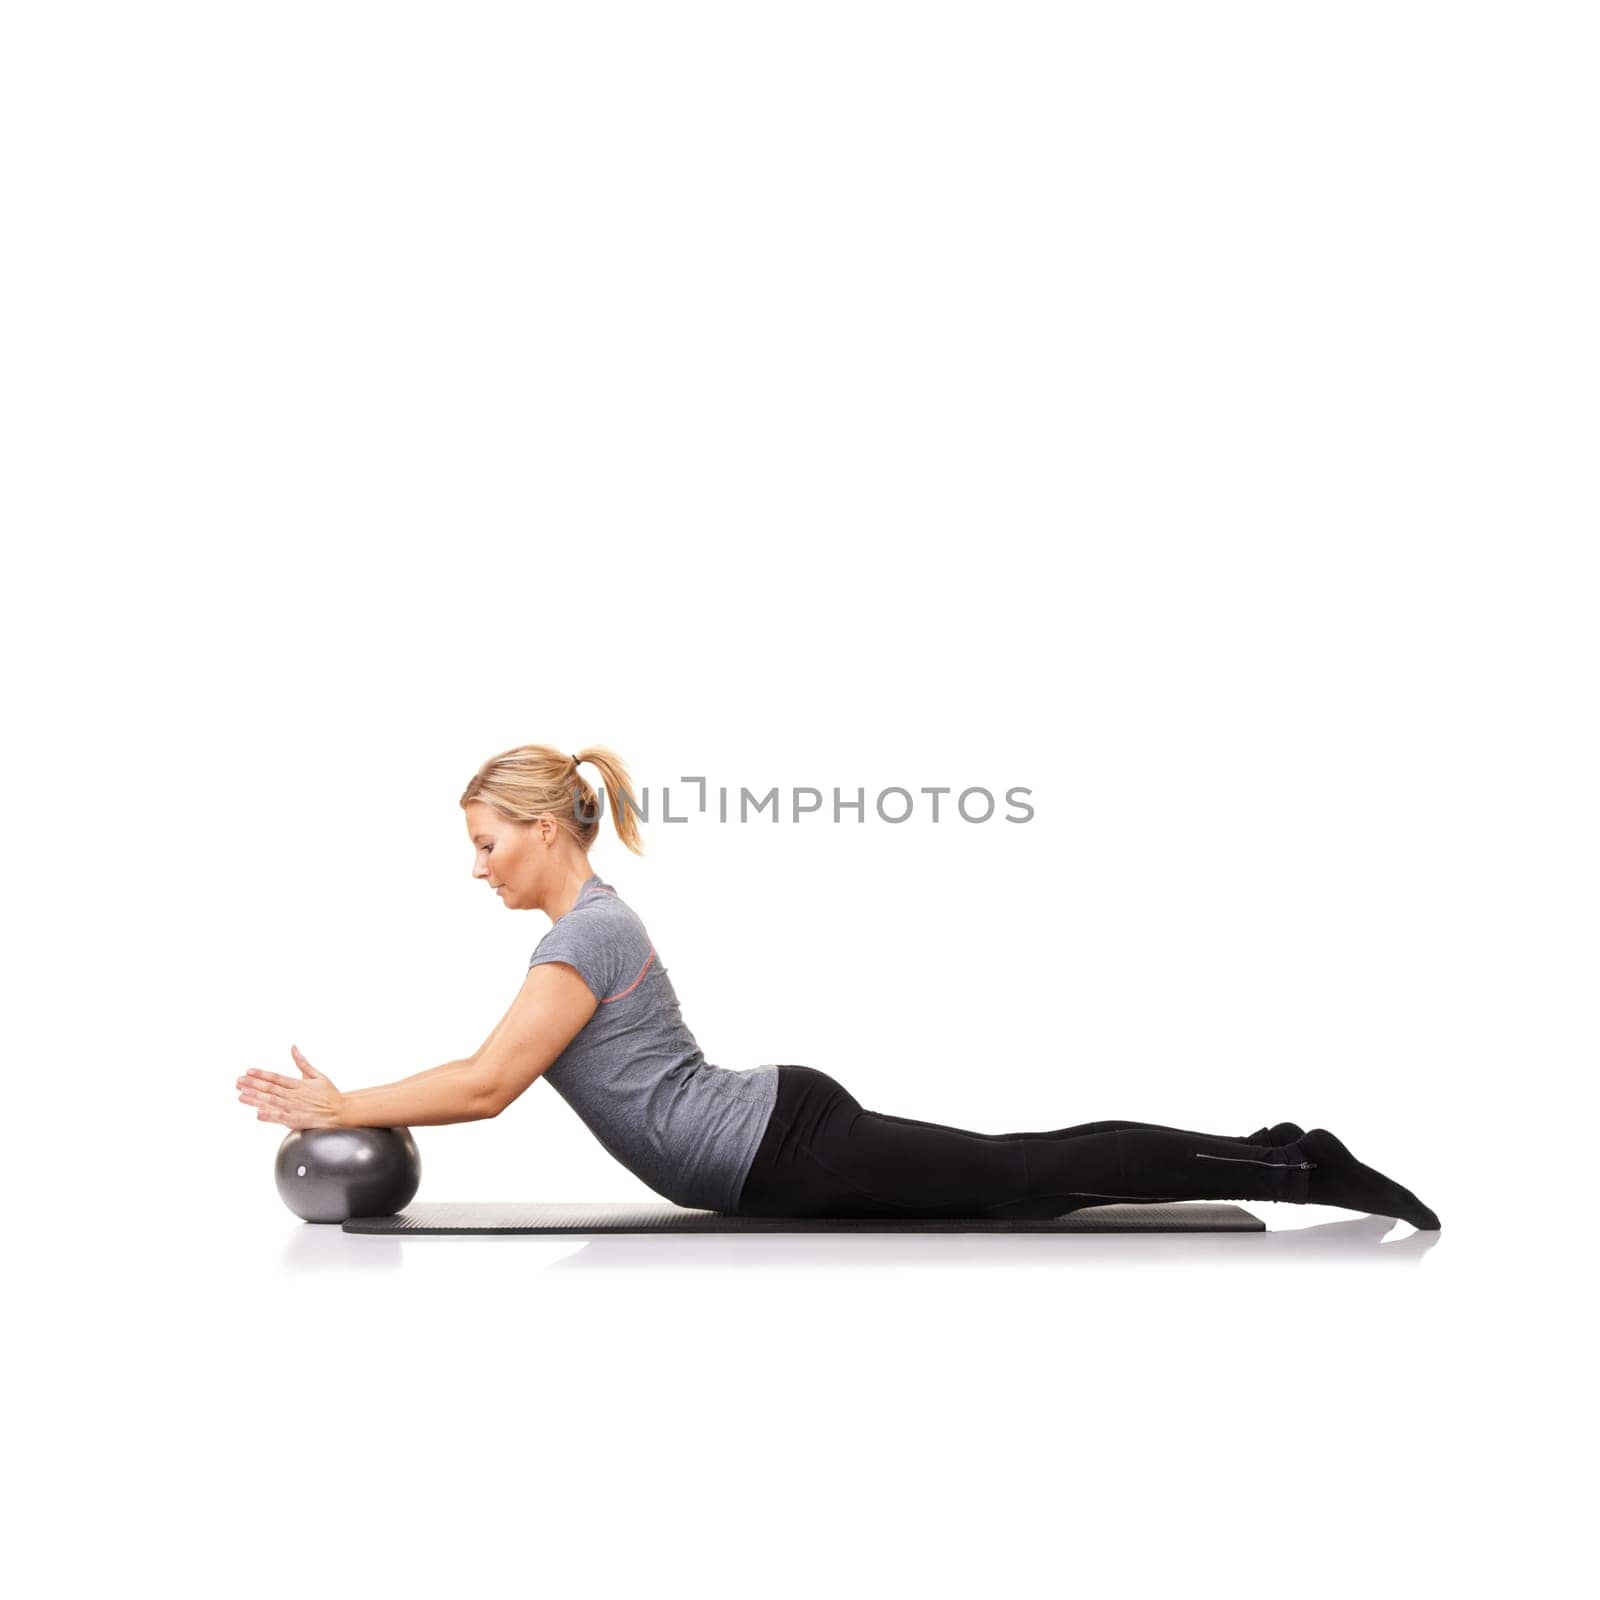 Woman, ball and arm balance on yoga mat for stretching back, pilates performance or white background. Female person, gym equipment and fitness in studio for mockup space, challenge or flexibility.